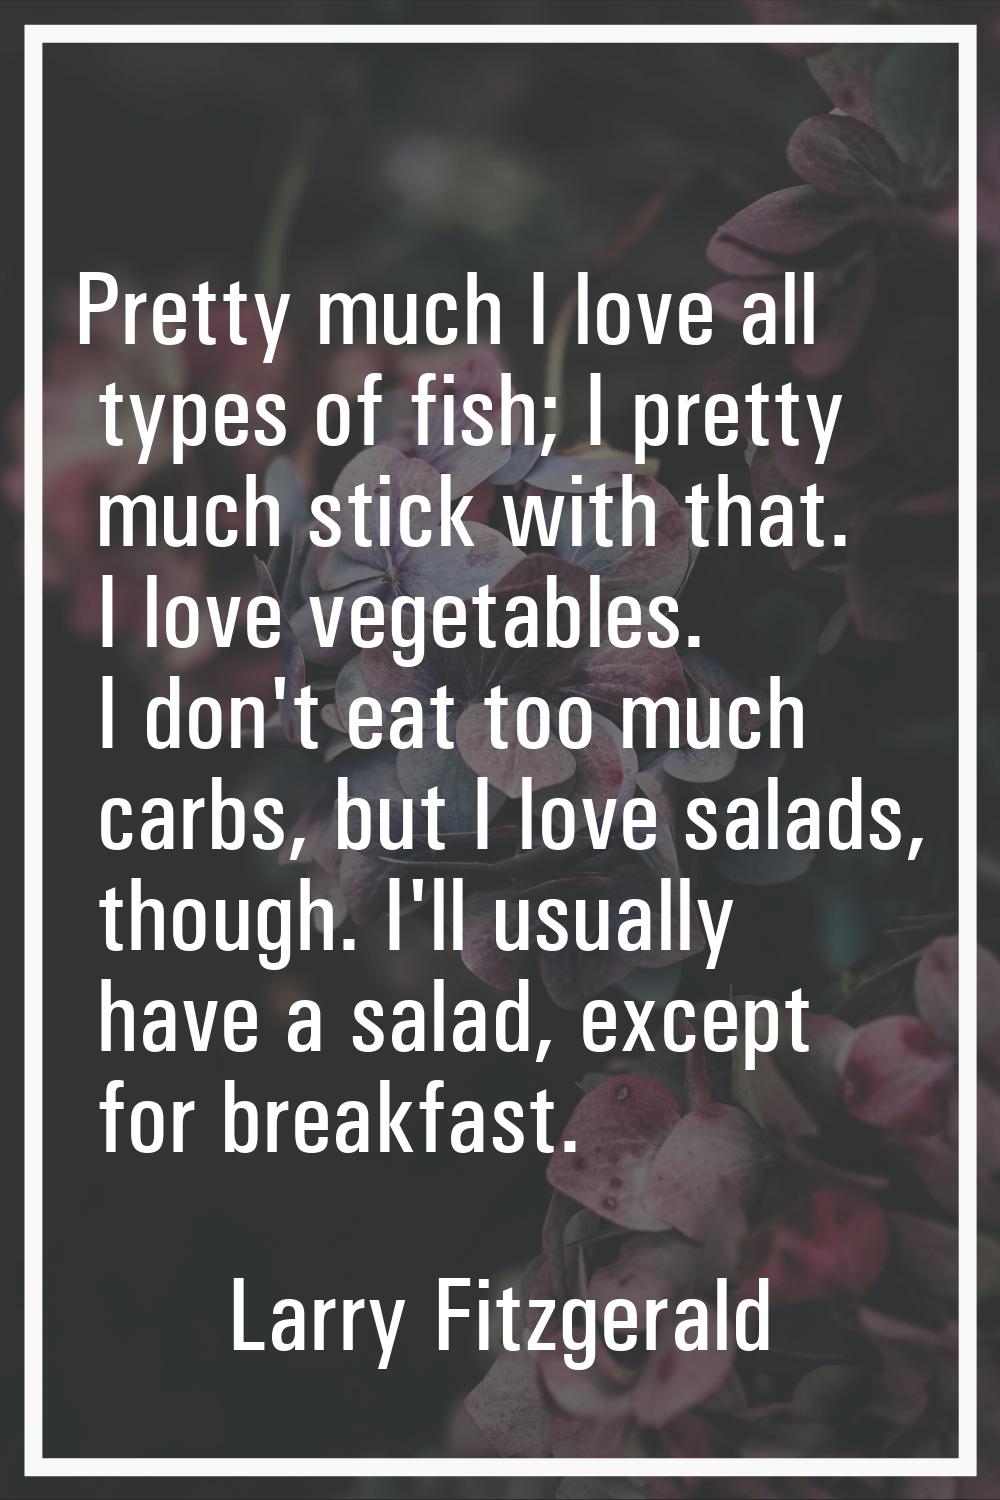 Pretty much I love all types of fish; I pretty much stick with that. I love vegetables. I don't eat